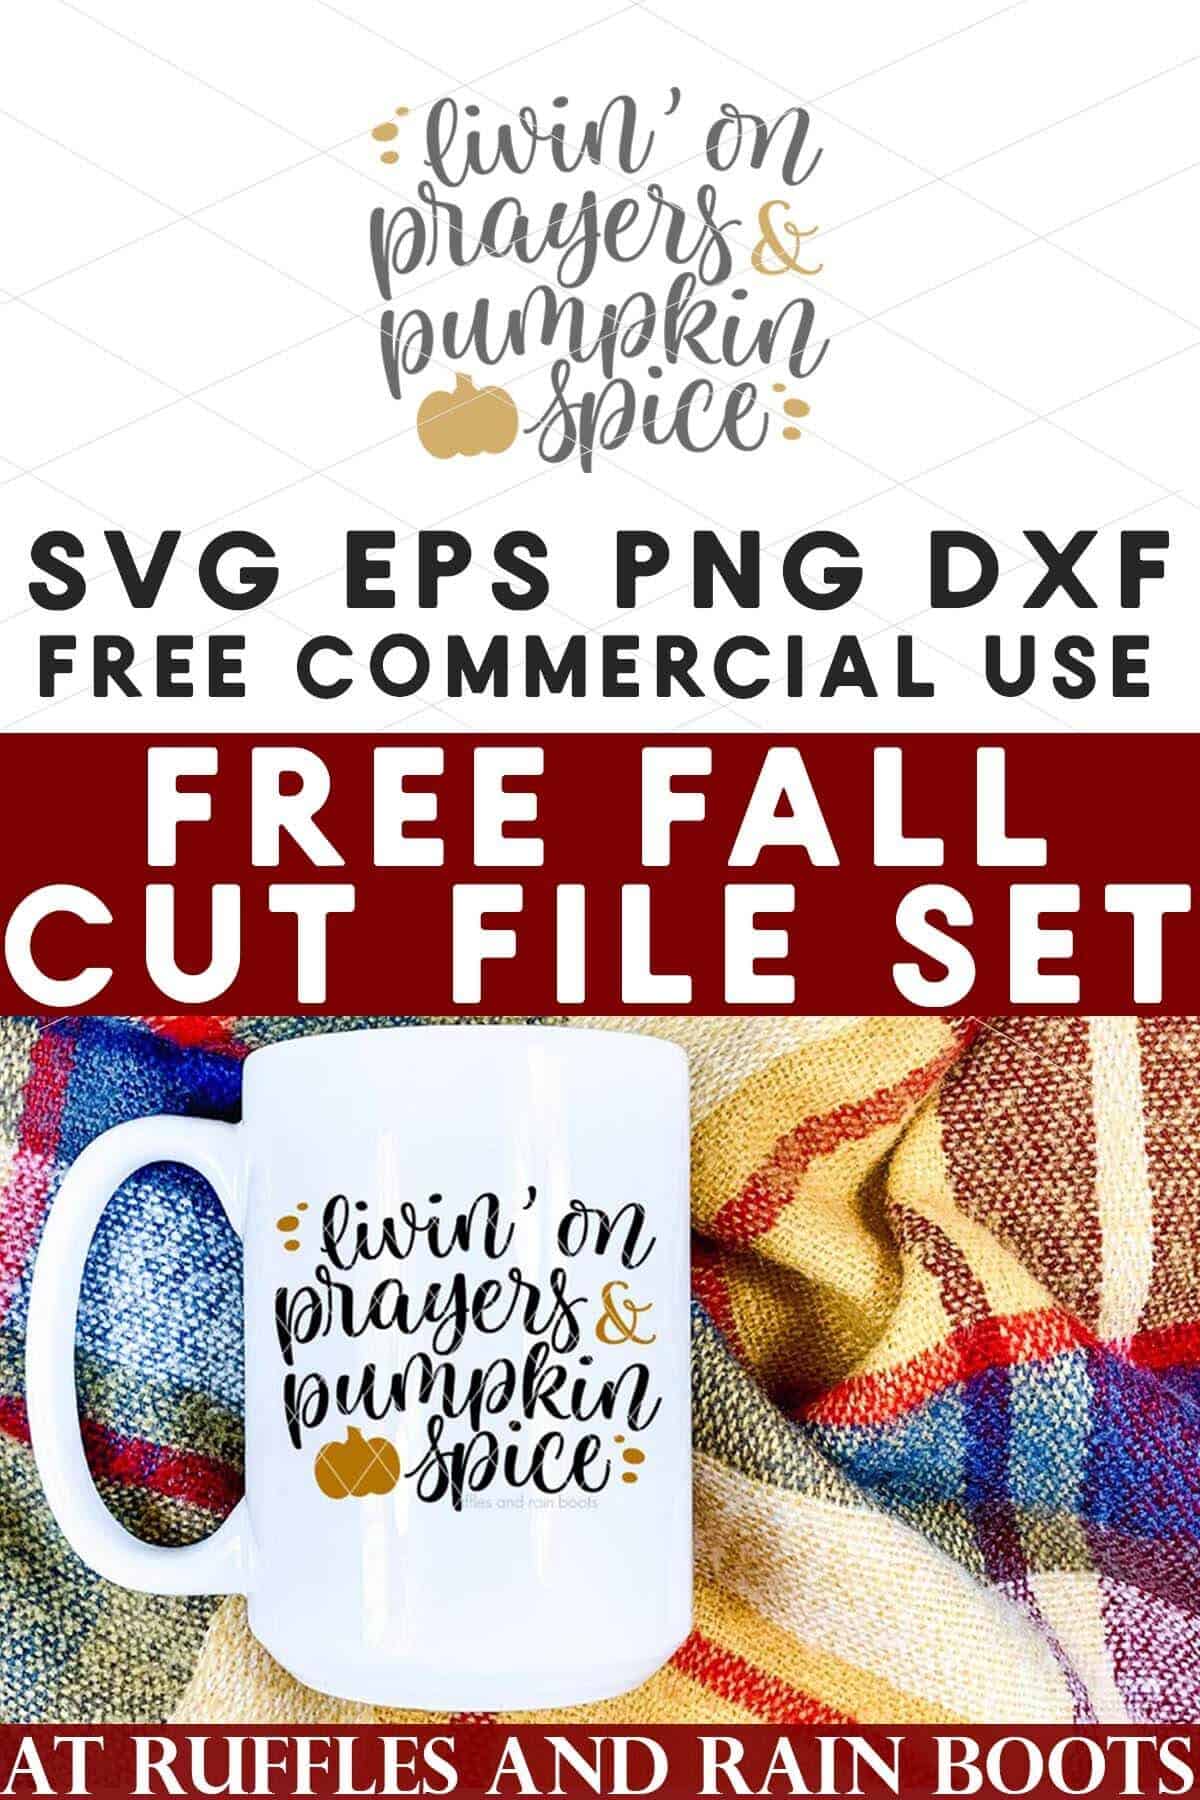 Pumpkin spice SVG free on coffee mug with plaid blanket with text which reads free fall cut file set.